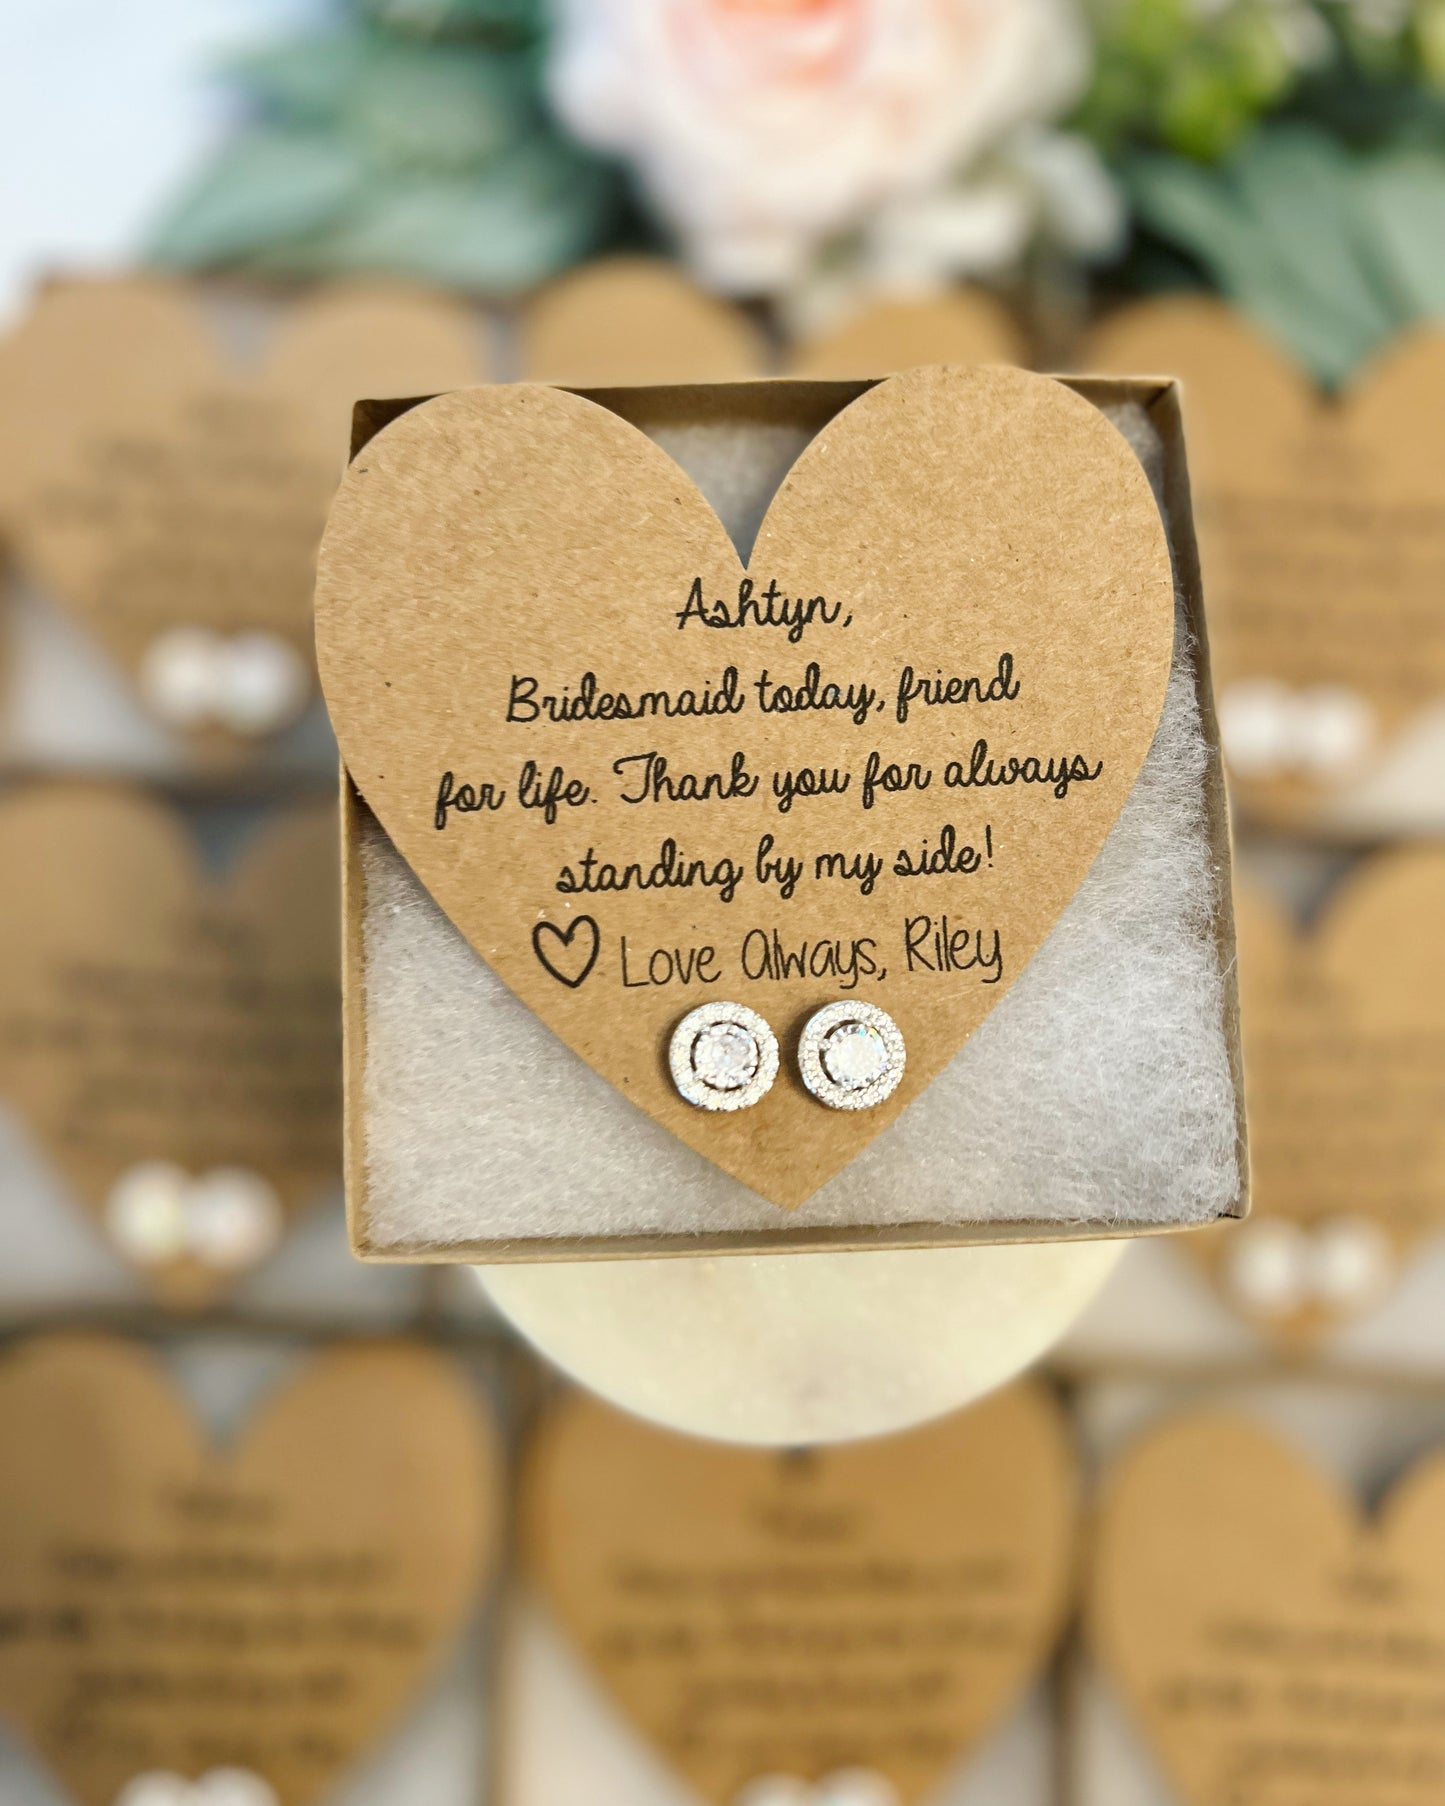 Bridesmaid Today, Friend for Life Earrings